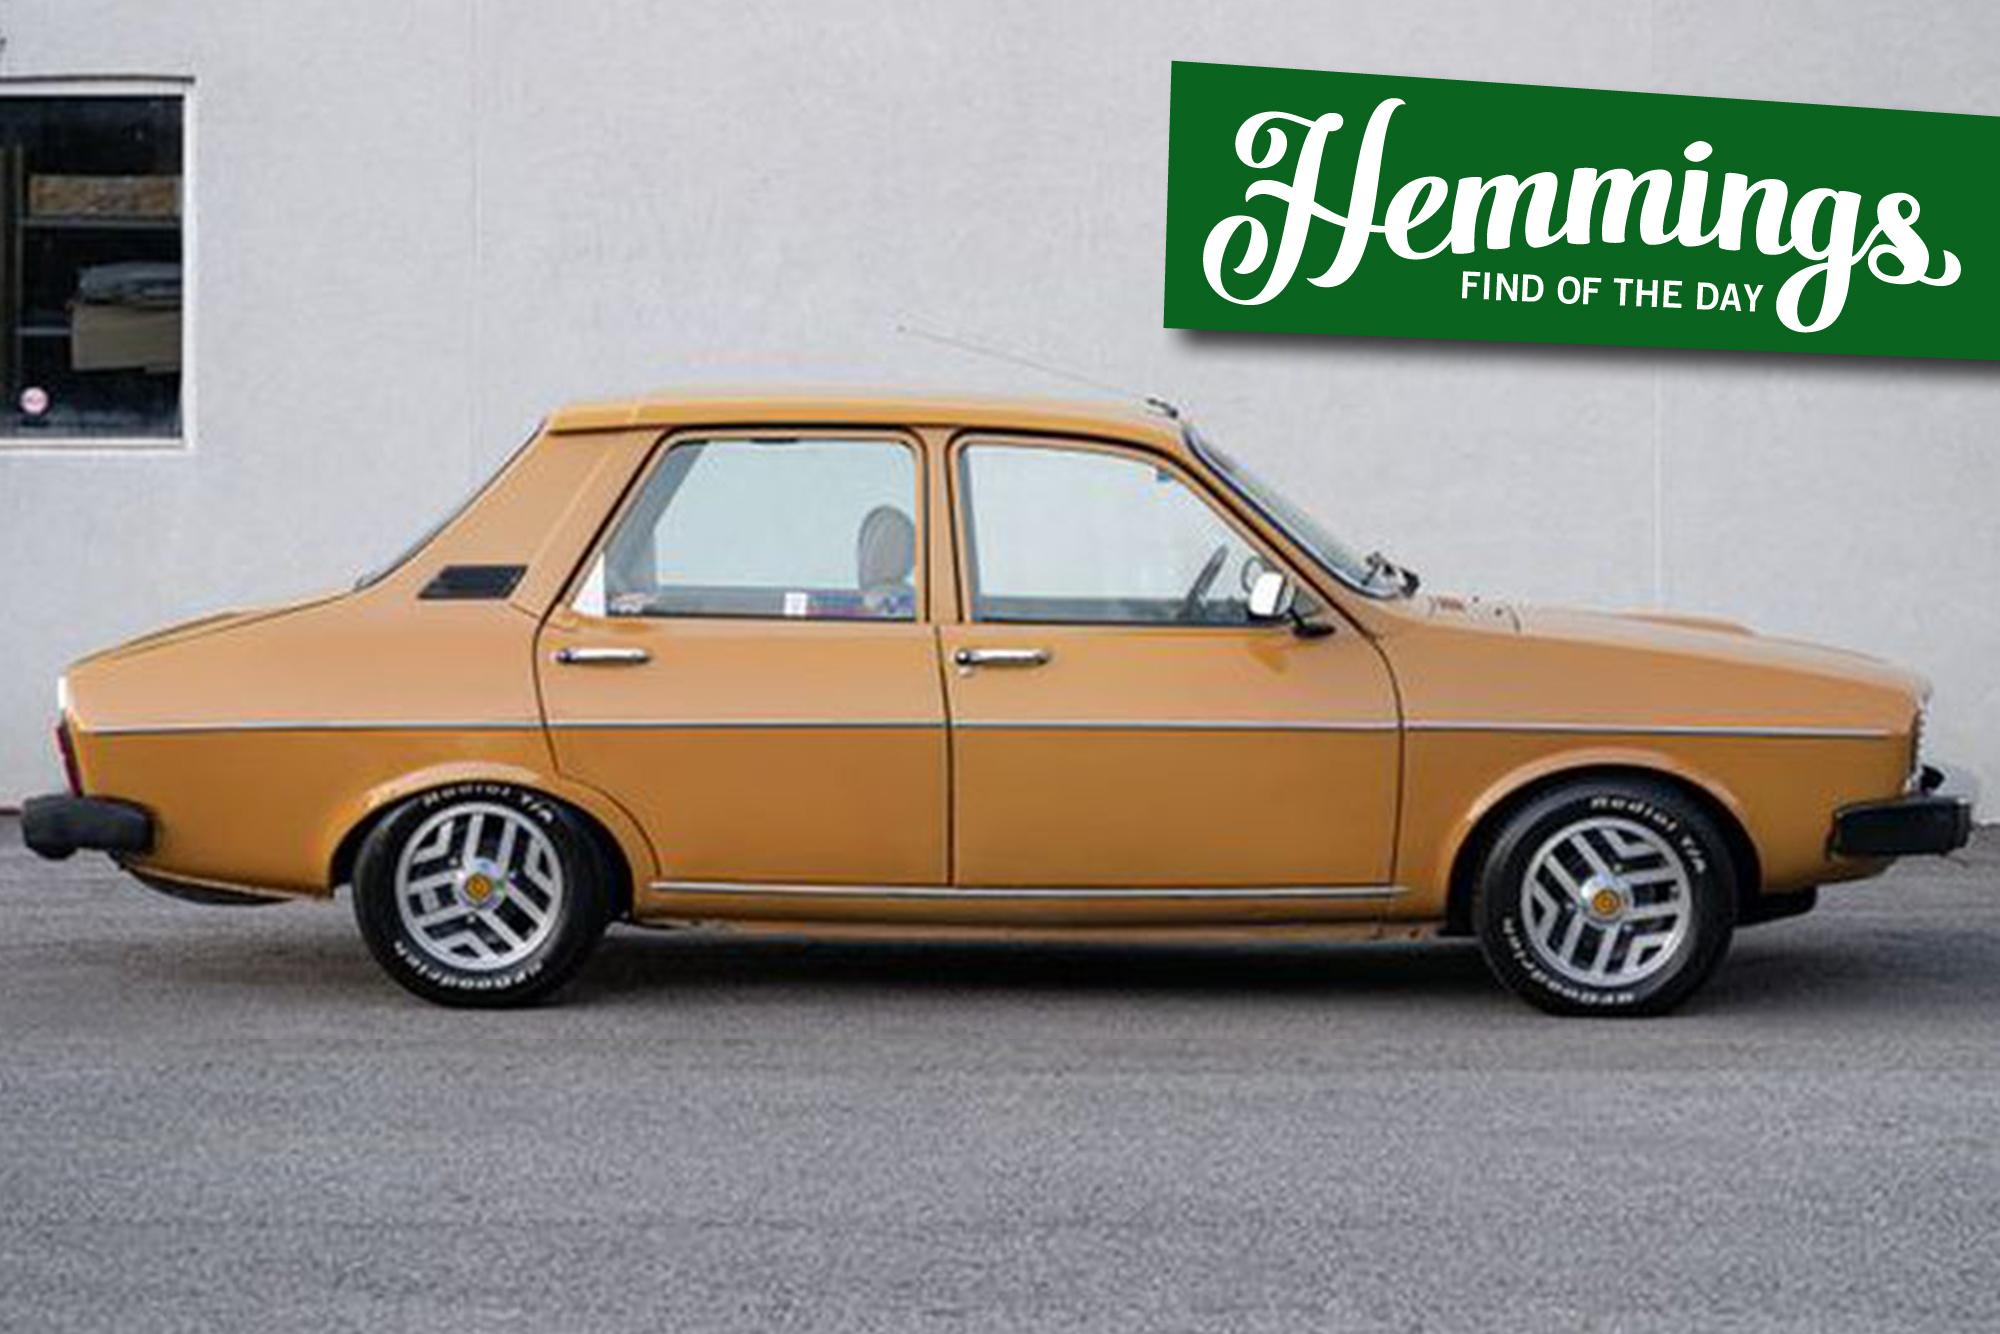 Hidden in plain sight, the upgrades to this 1979 Renault 12 give it a little extra zip